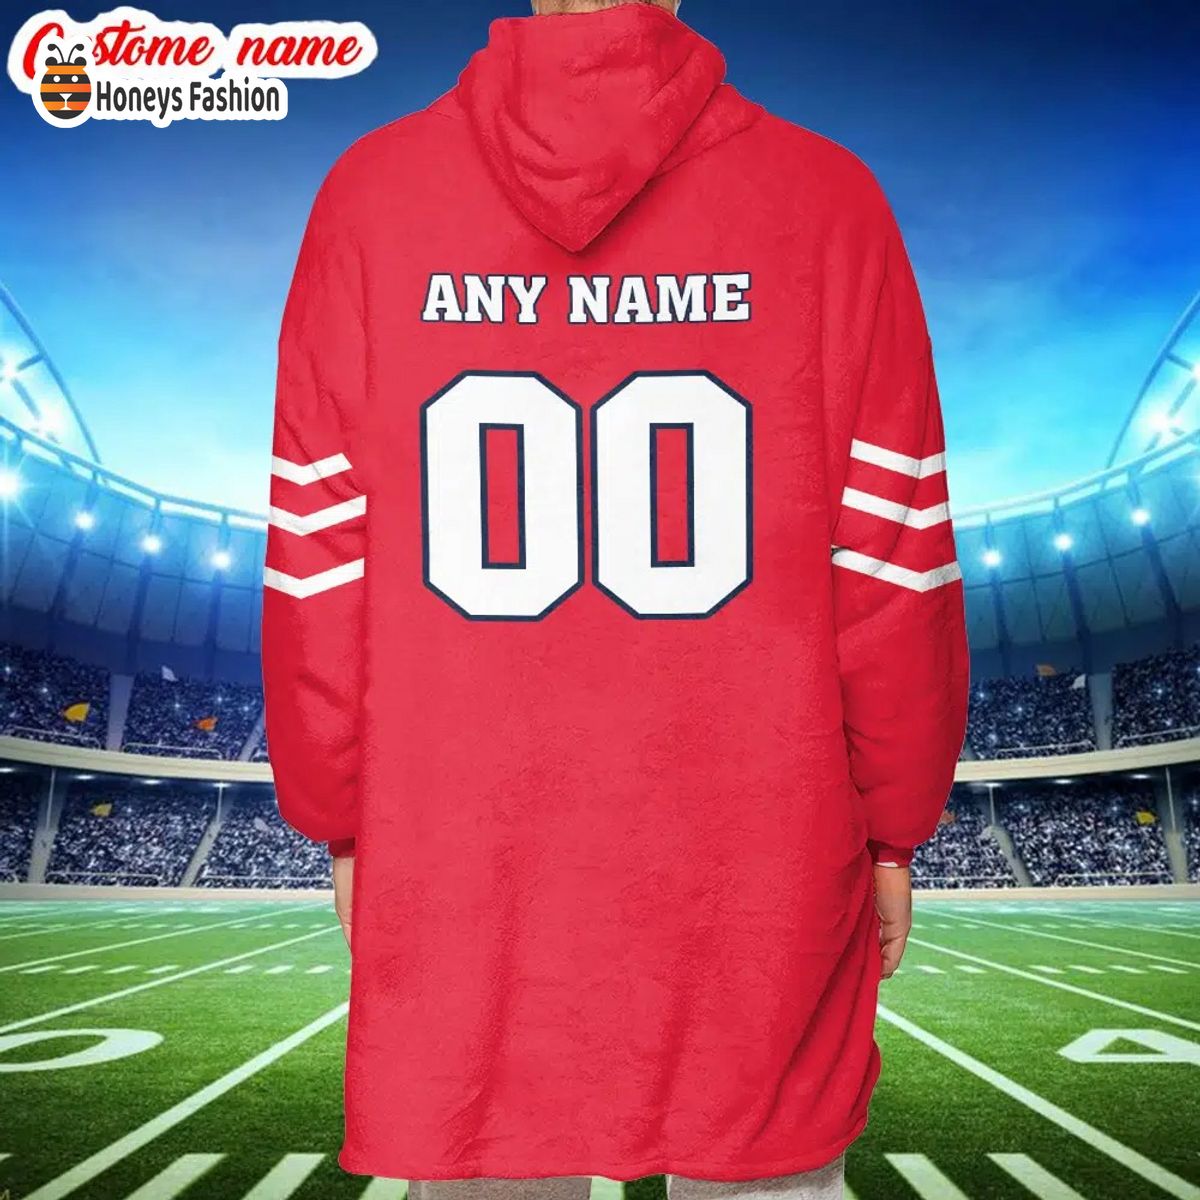 Kansas City Chiefs NFL Adidas all day i dream about Chiefs blanket hoodie